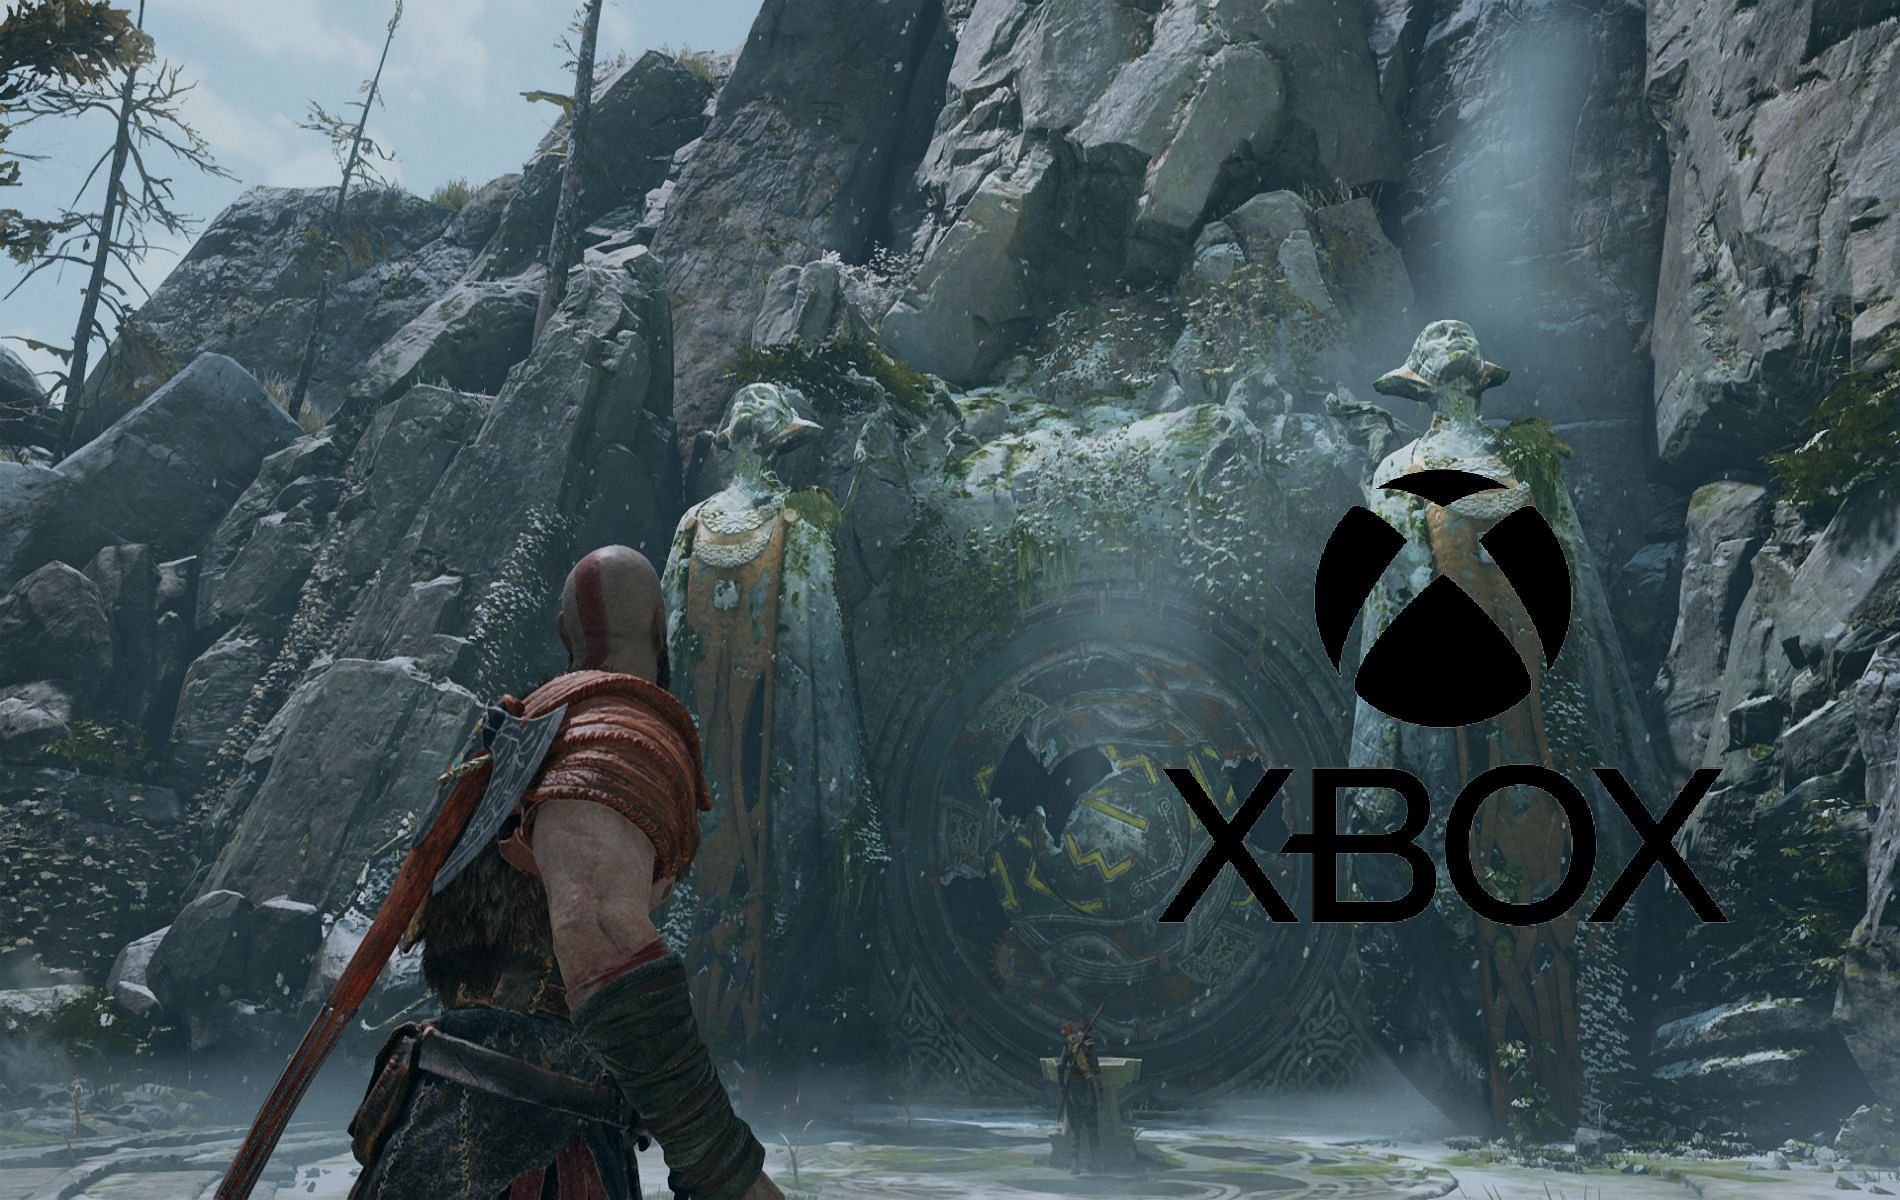 God of War PC Was in Development for Two Years, PlayStation